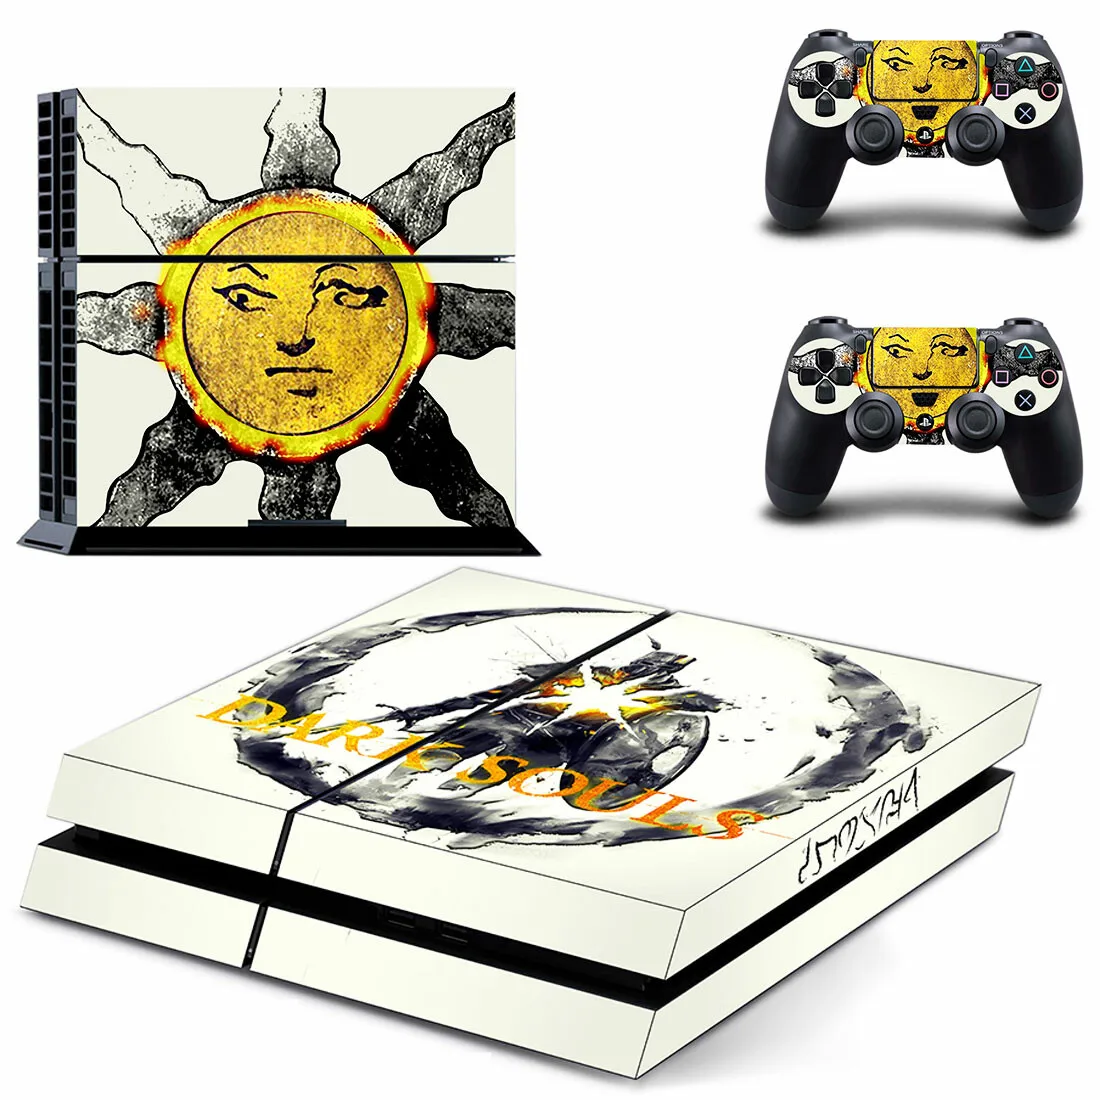 Dark Souls PS4 Stickers Play station 4 Skin Sticker Decals Cover For PlayStation 4 PS4 Console & Controller Skins Vinyl